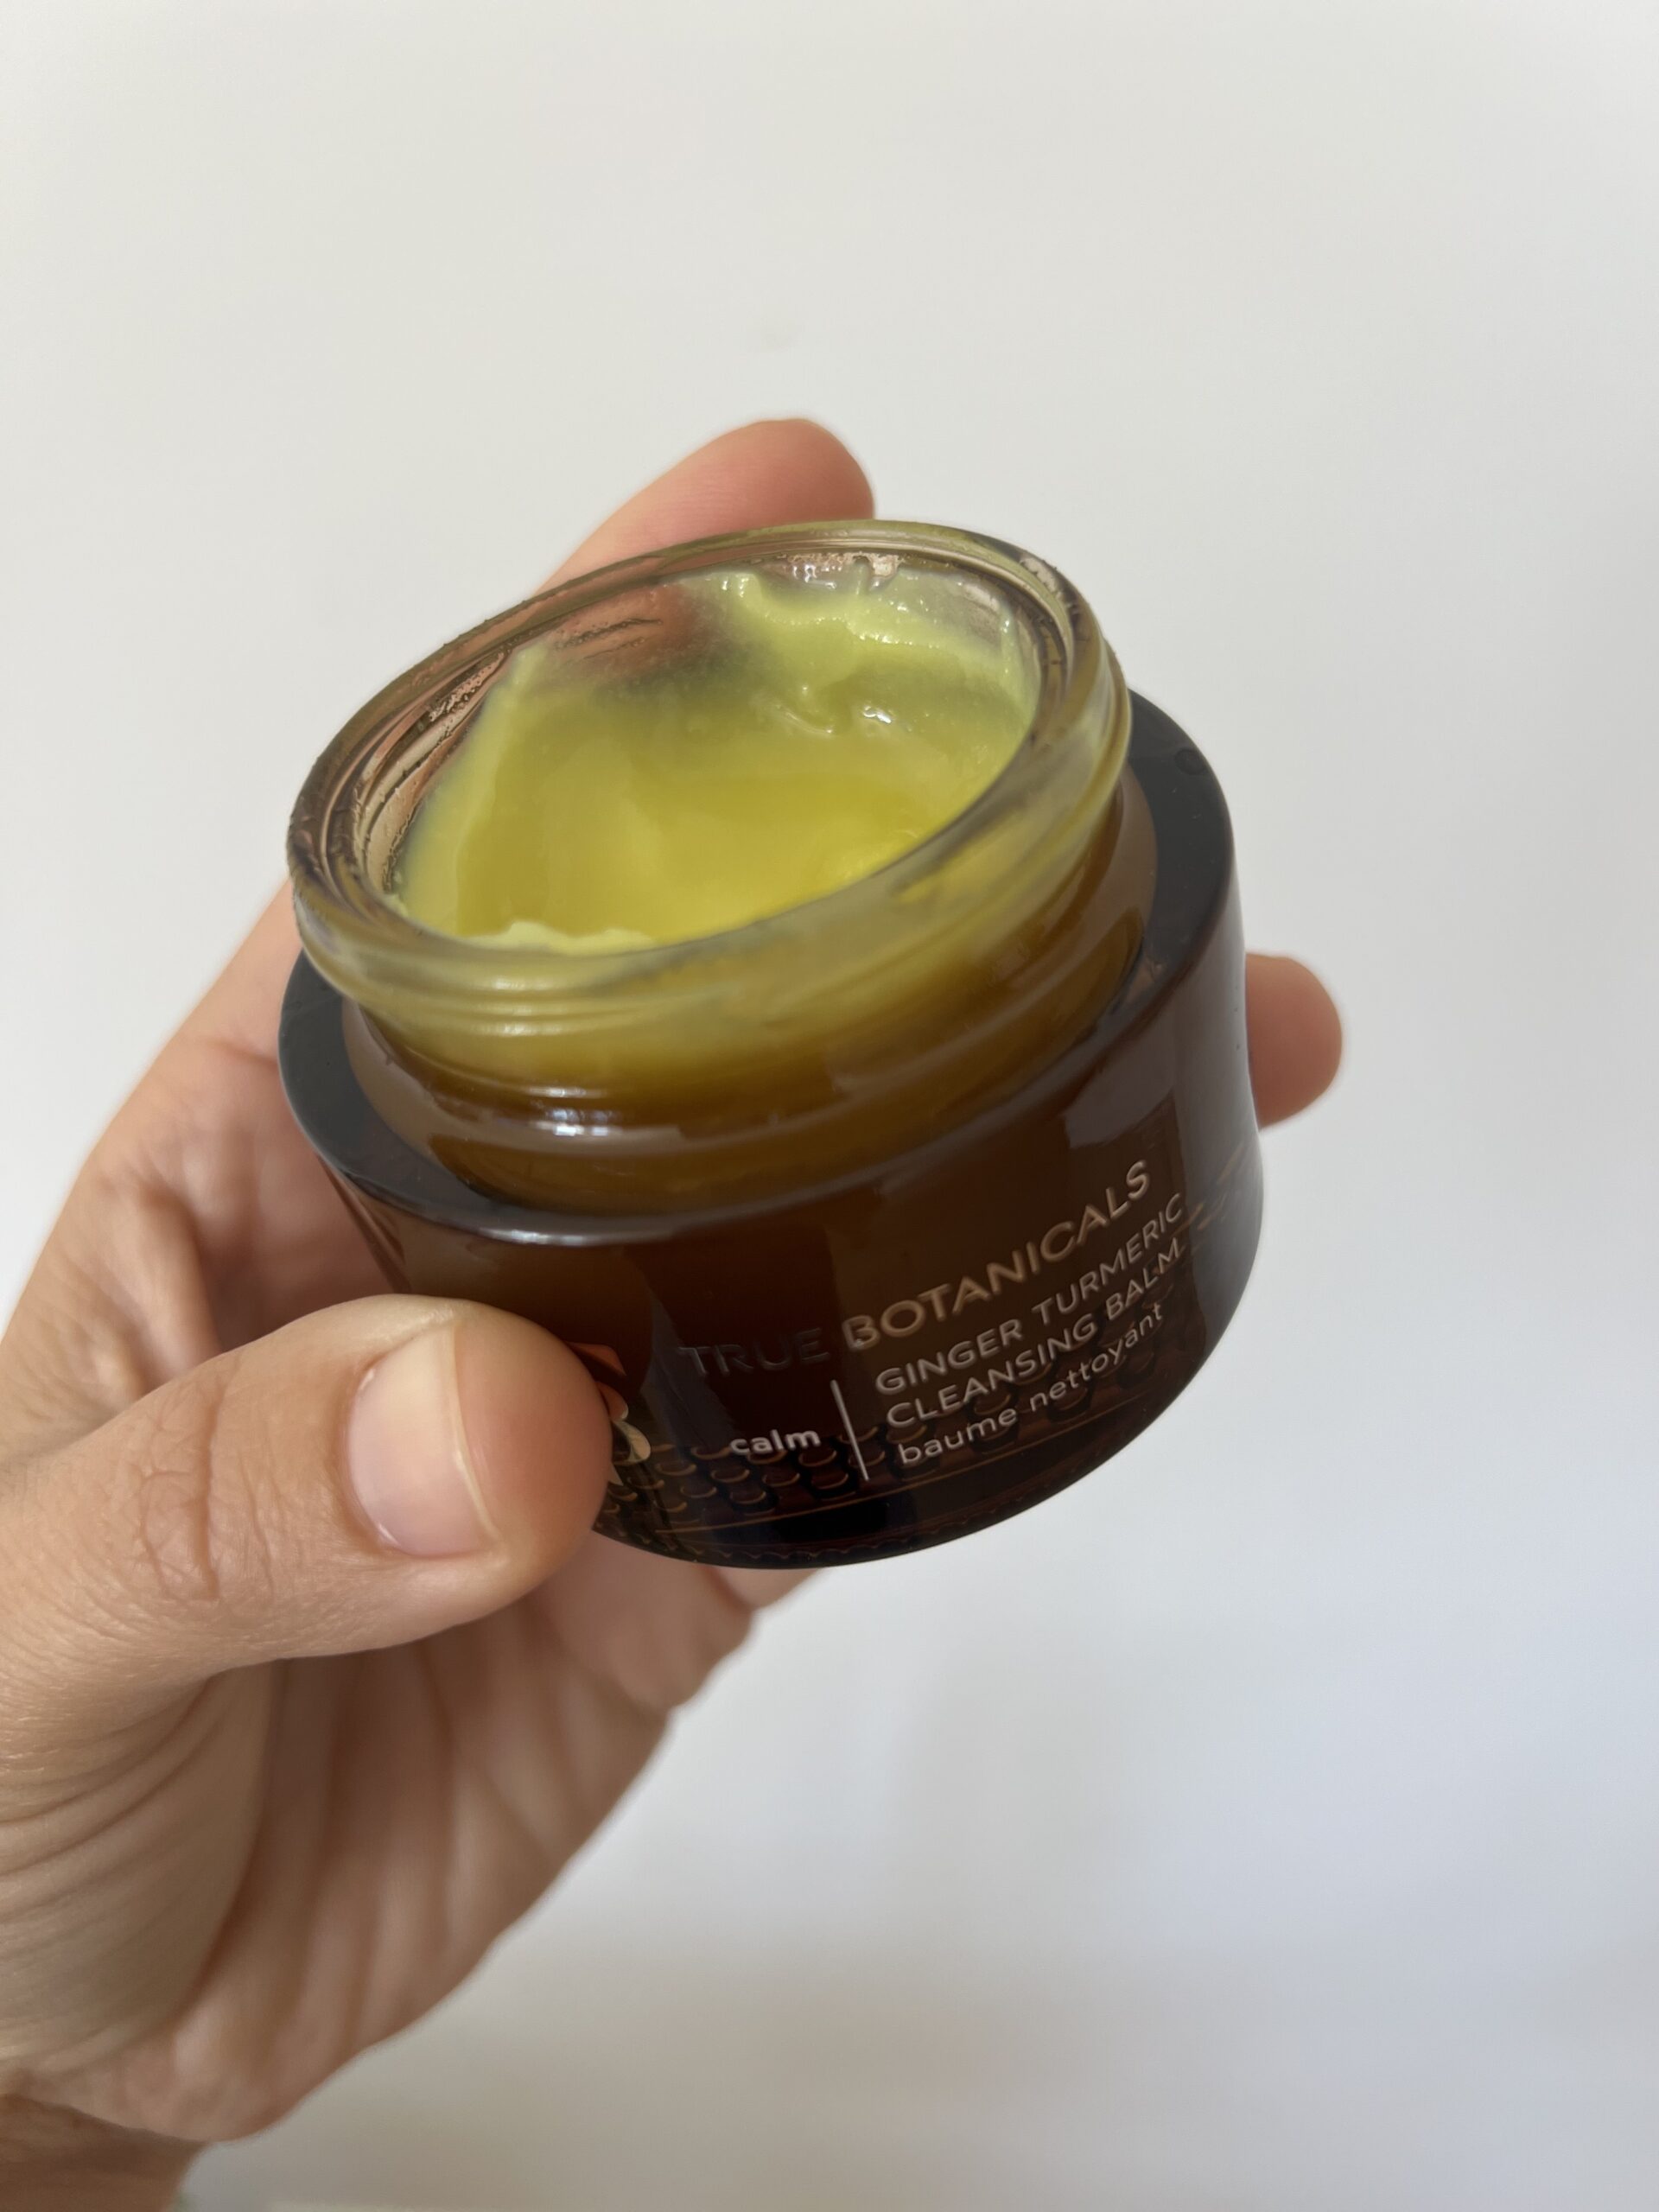 A hand holds up True Botanicals ginger turmeric cleansing balm.
